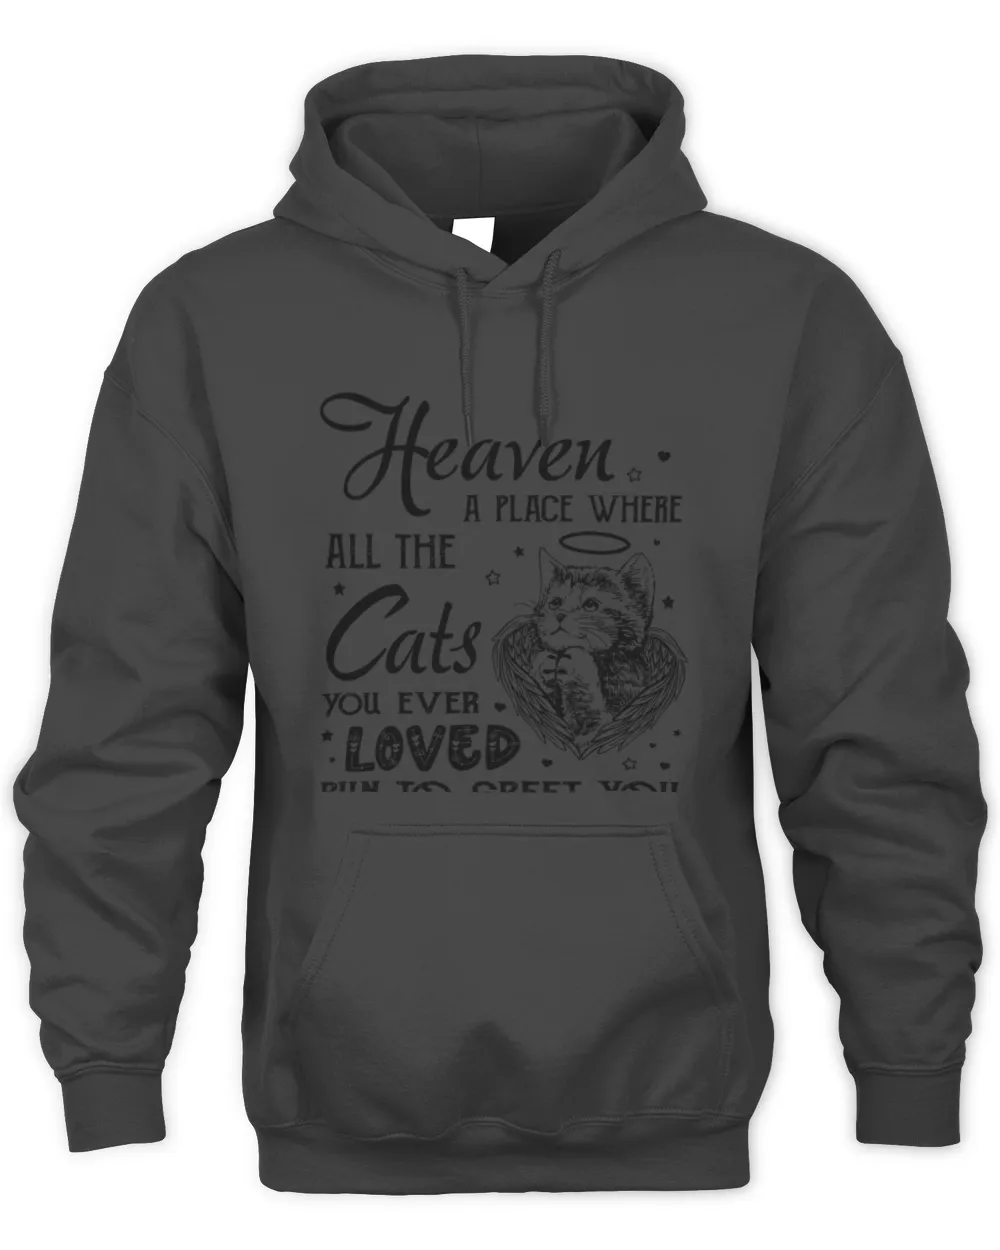 Heaven a place where all the cats